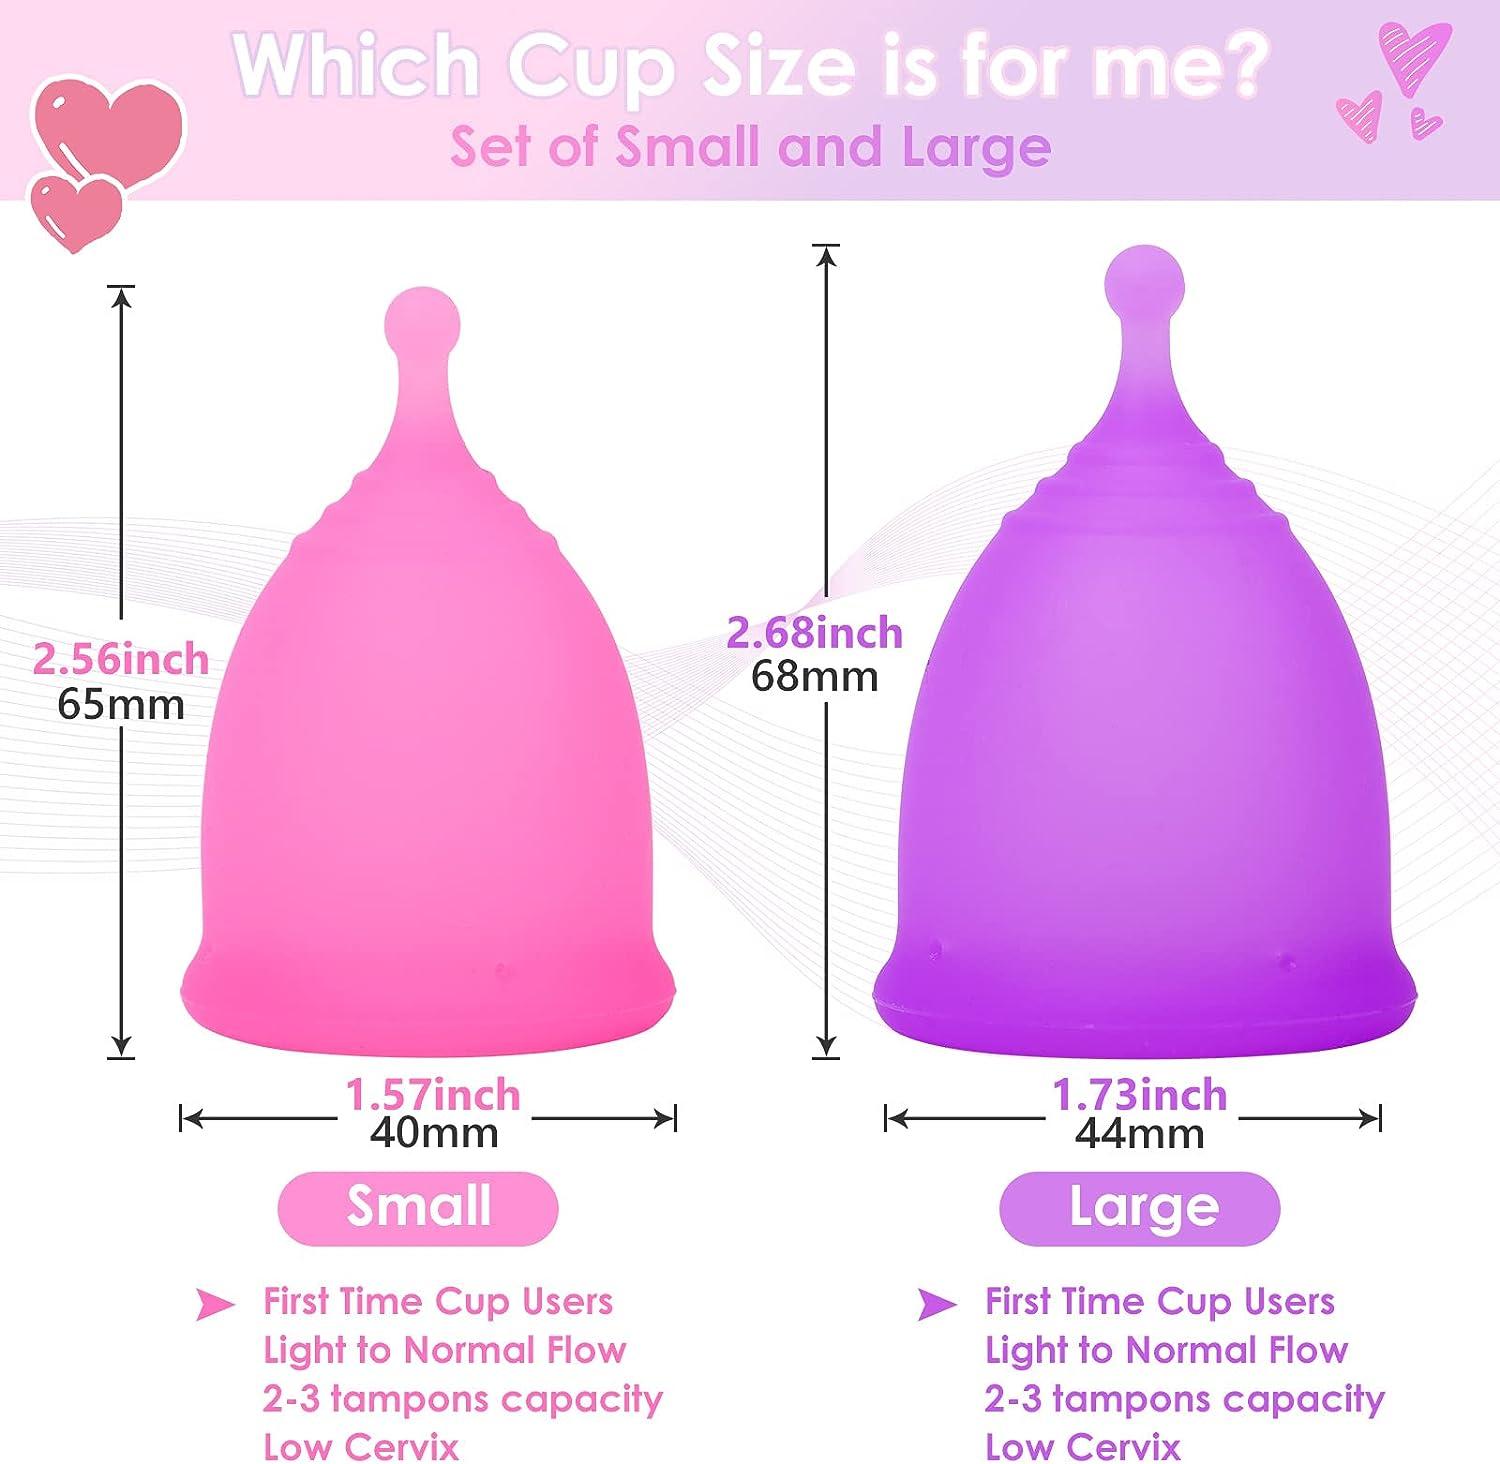 Softcup Menstrual Cup | Reusable Period Cup | Ultra-Soft Medical-Grade  Silicone | Leak-Free, 12-Hour Wear | Made in The USA (Size 2)